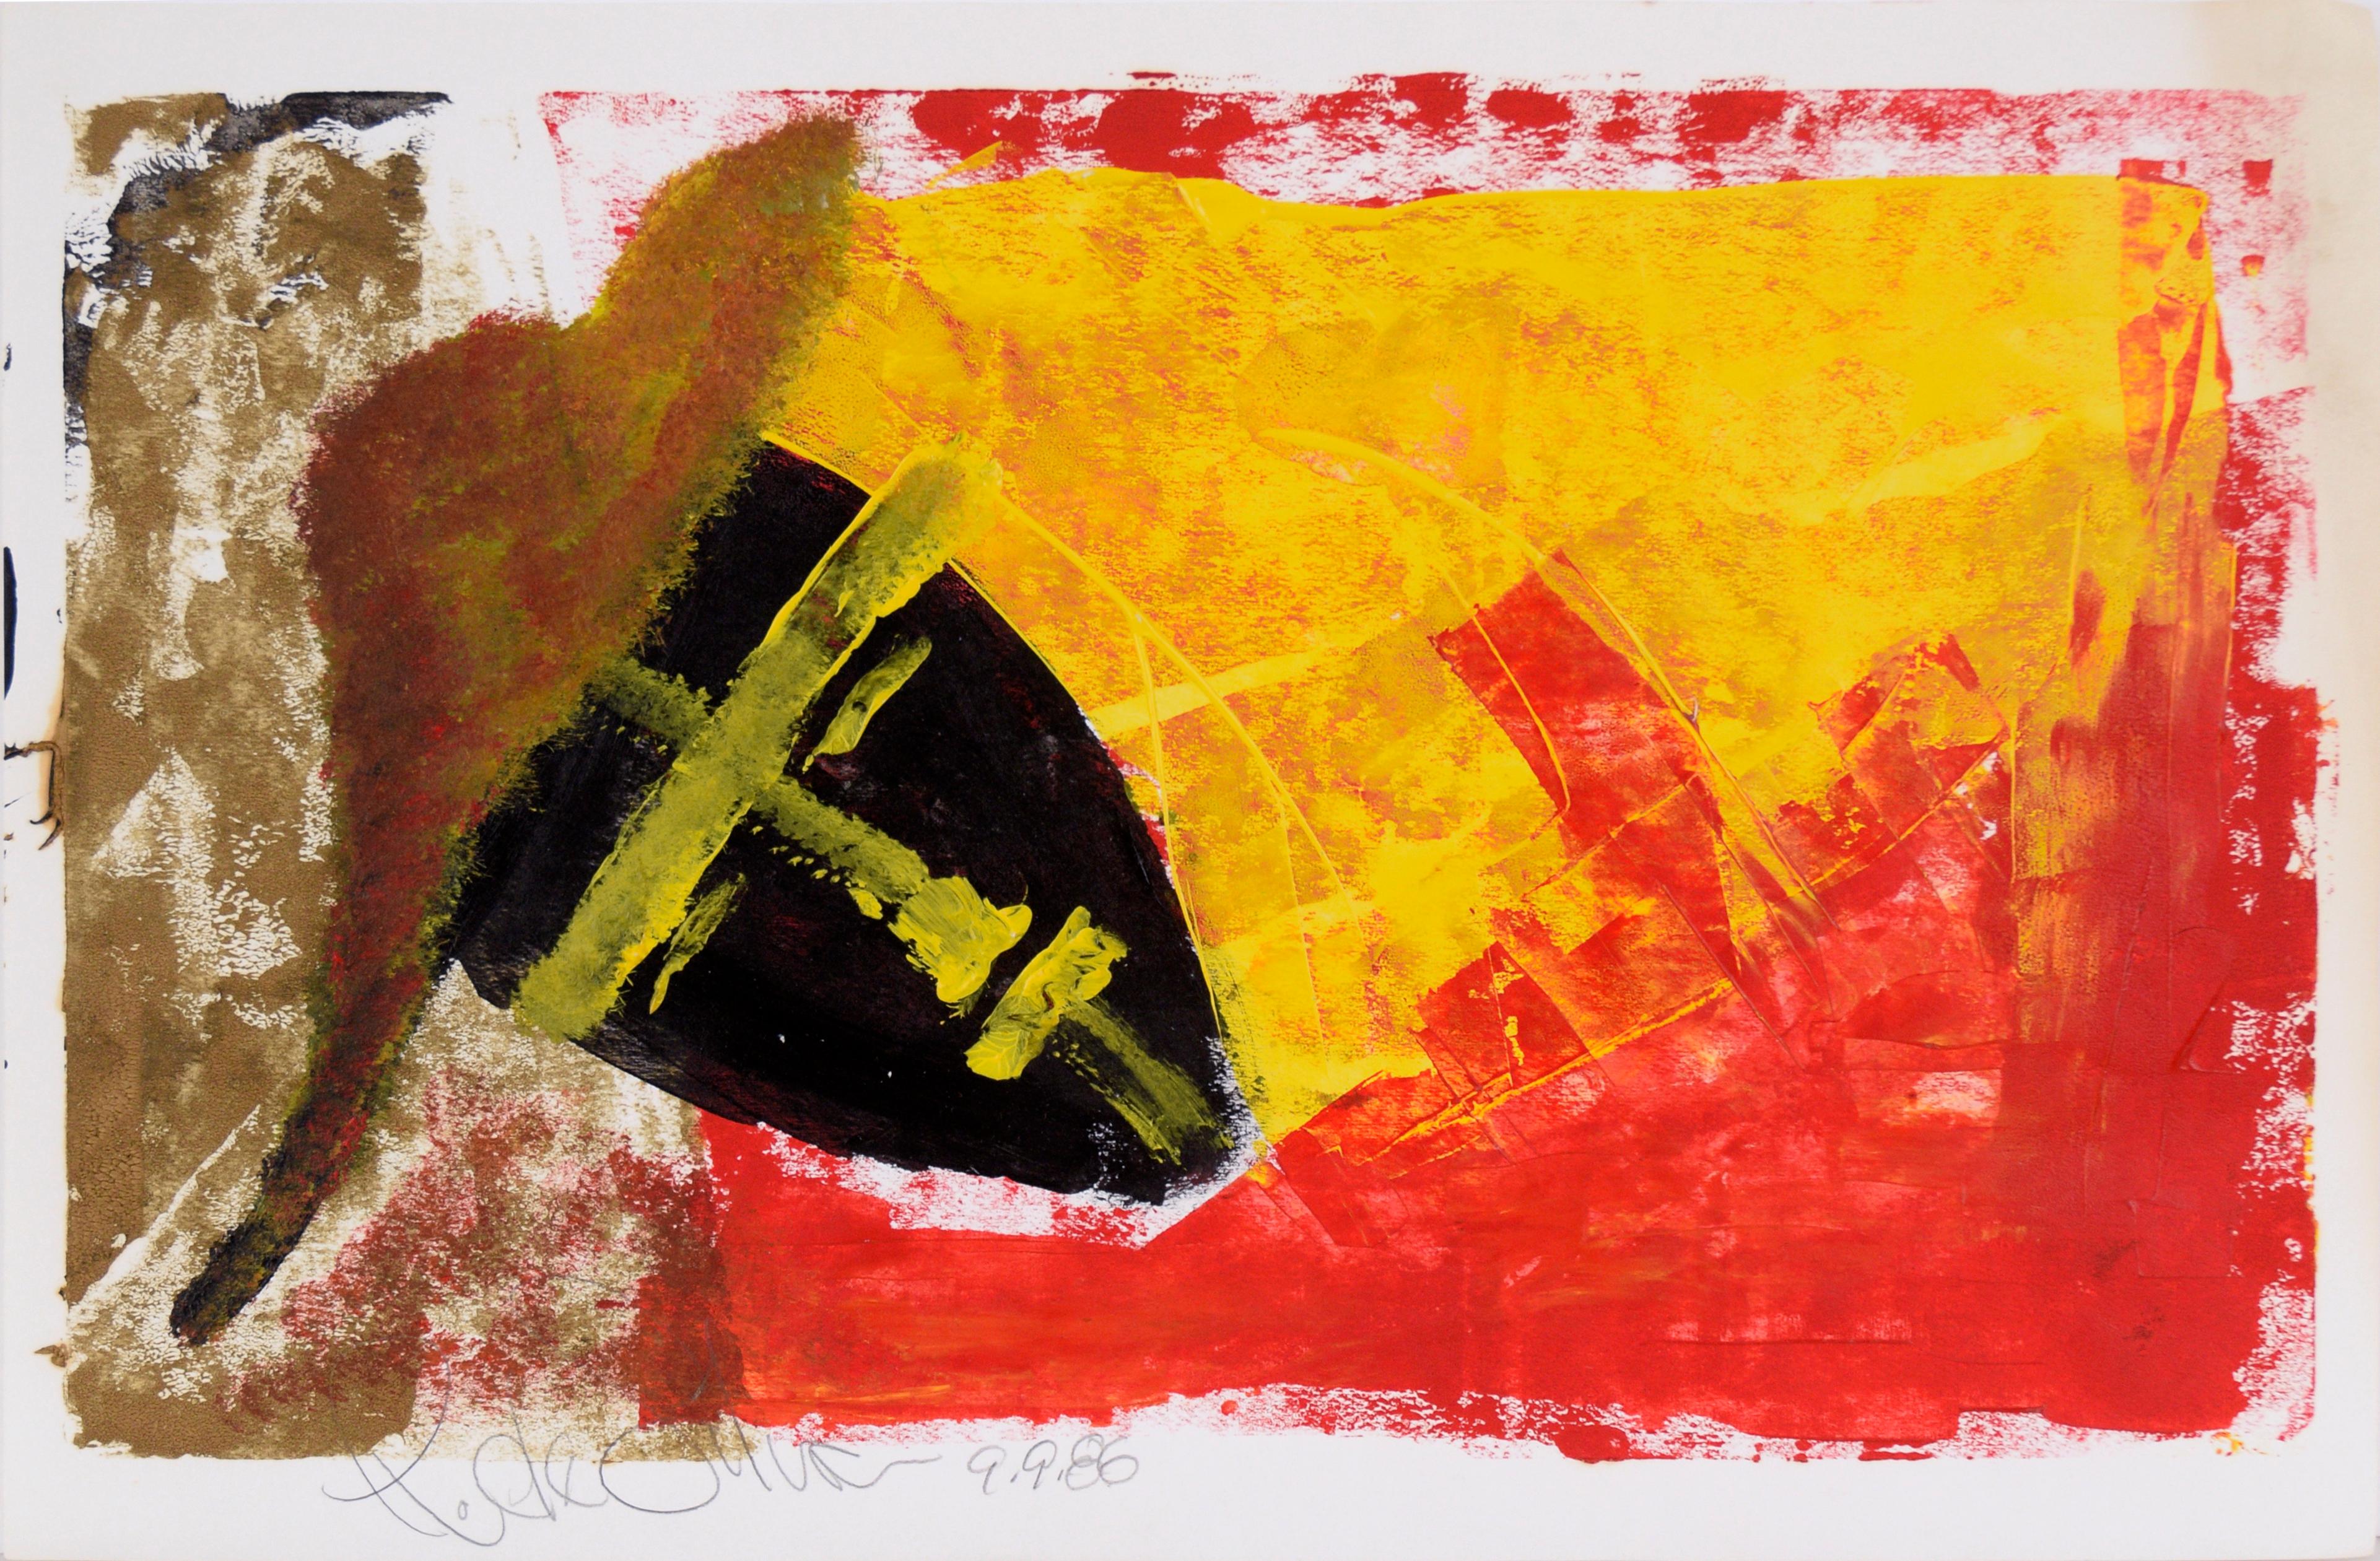 Ricardo de Silva Abstract Painting - Sombrero in the Iron Mask - Geometric Abstract Expressionist in Acrylic on Paper